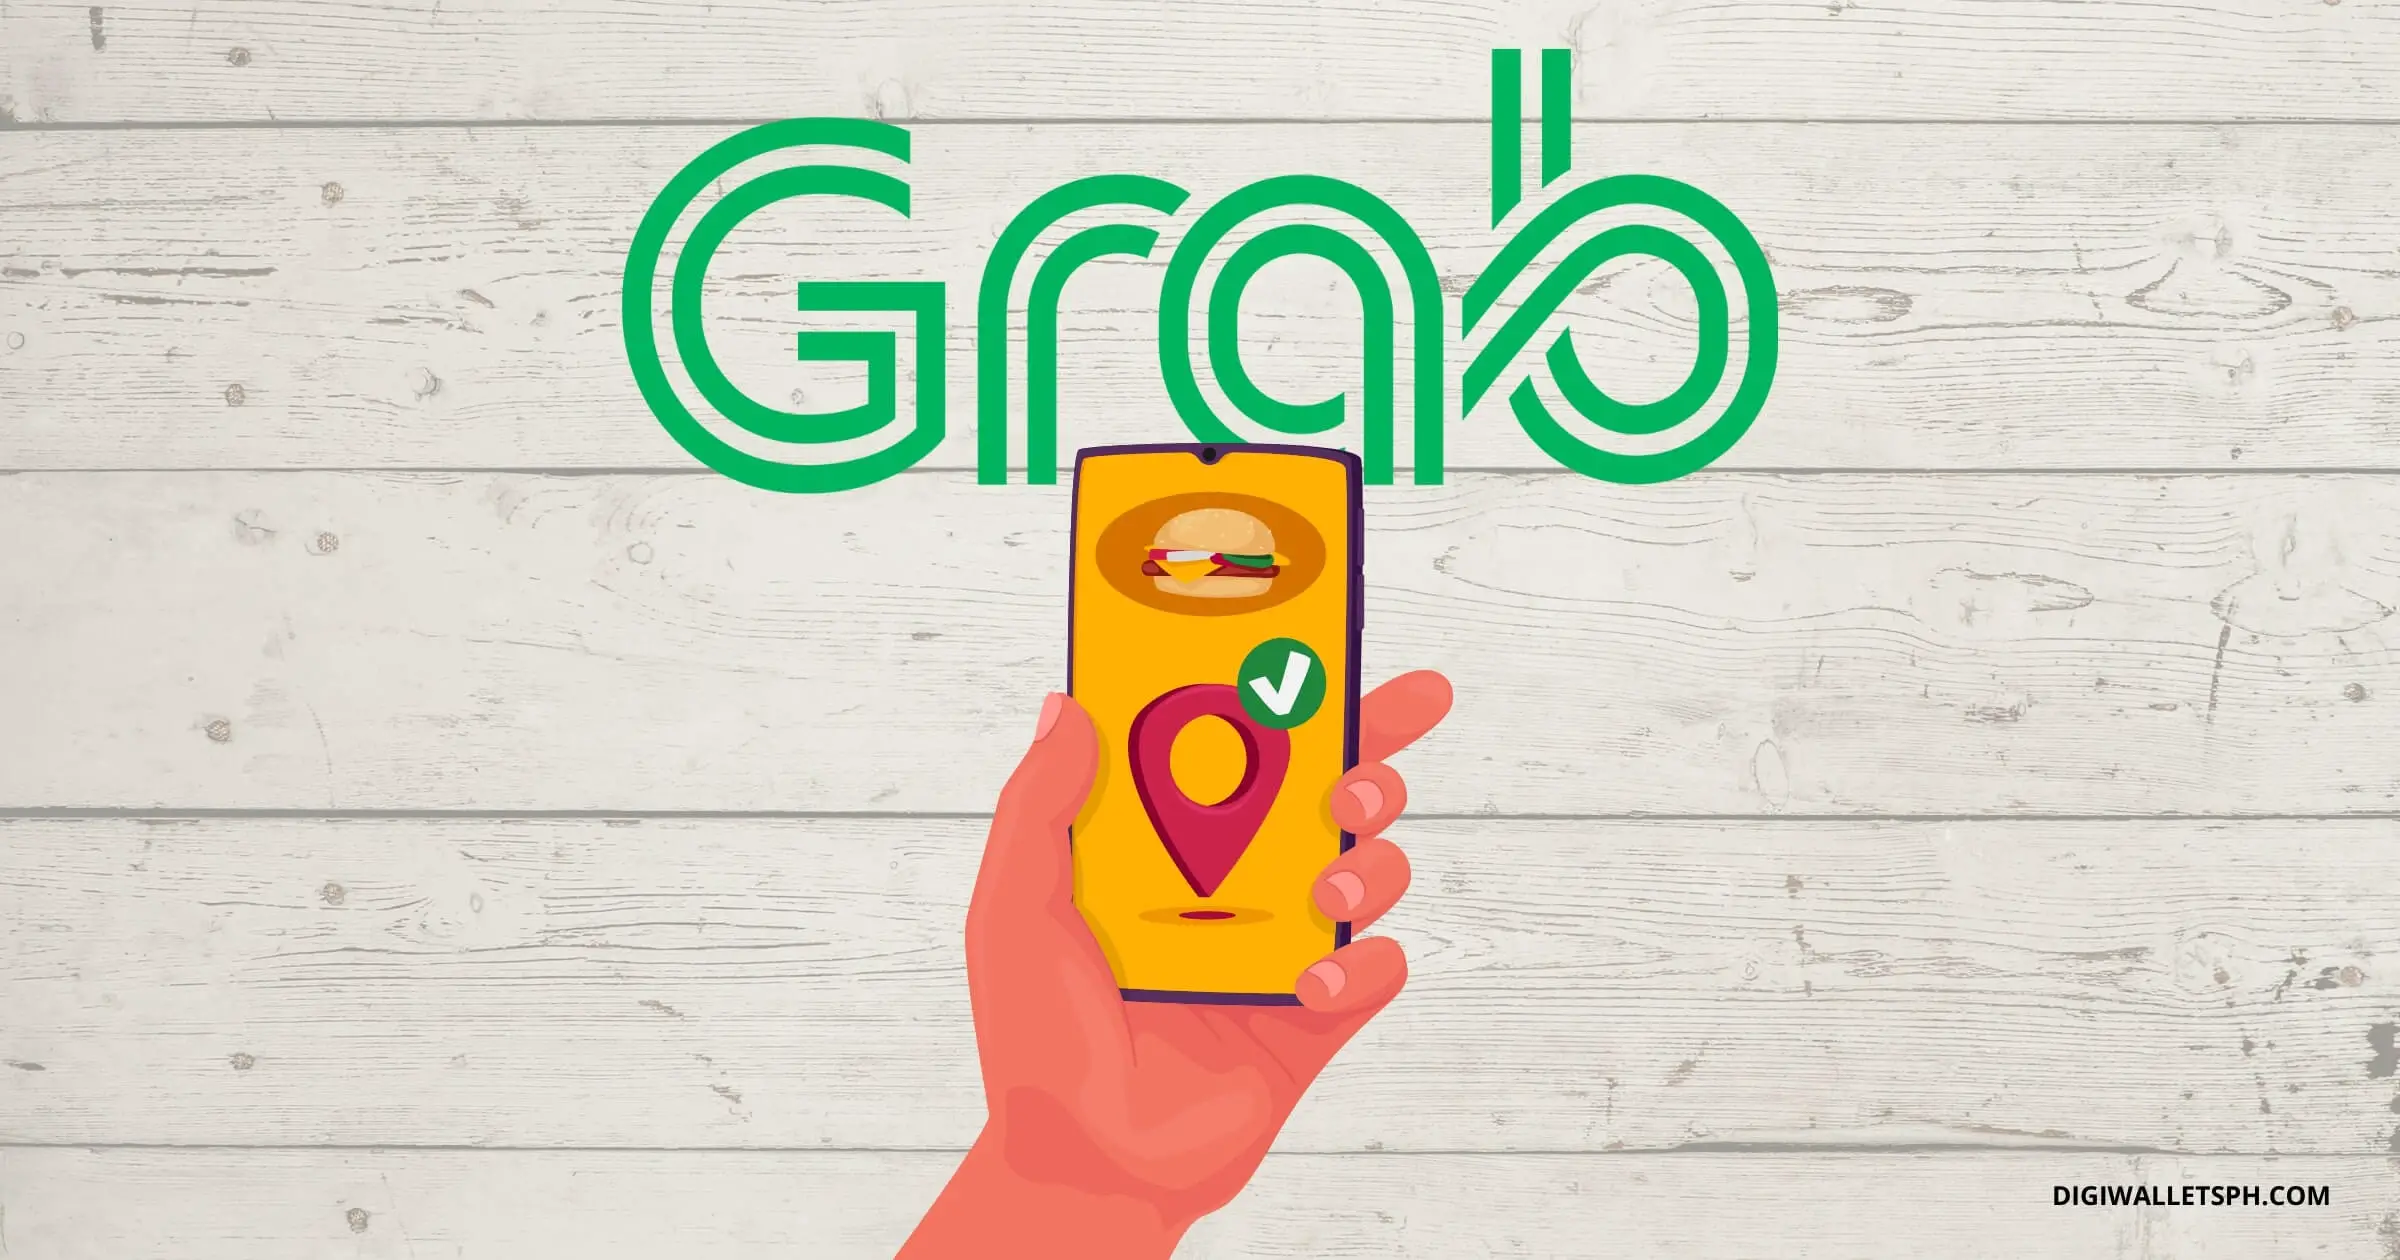 How to put exact address in GrabFood